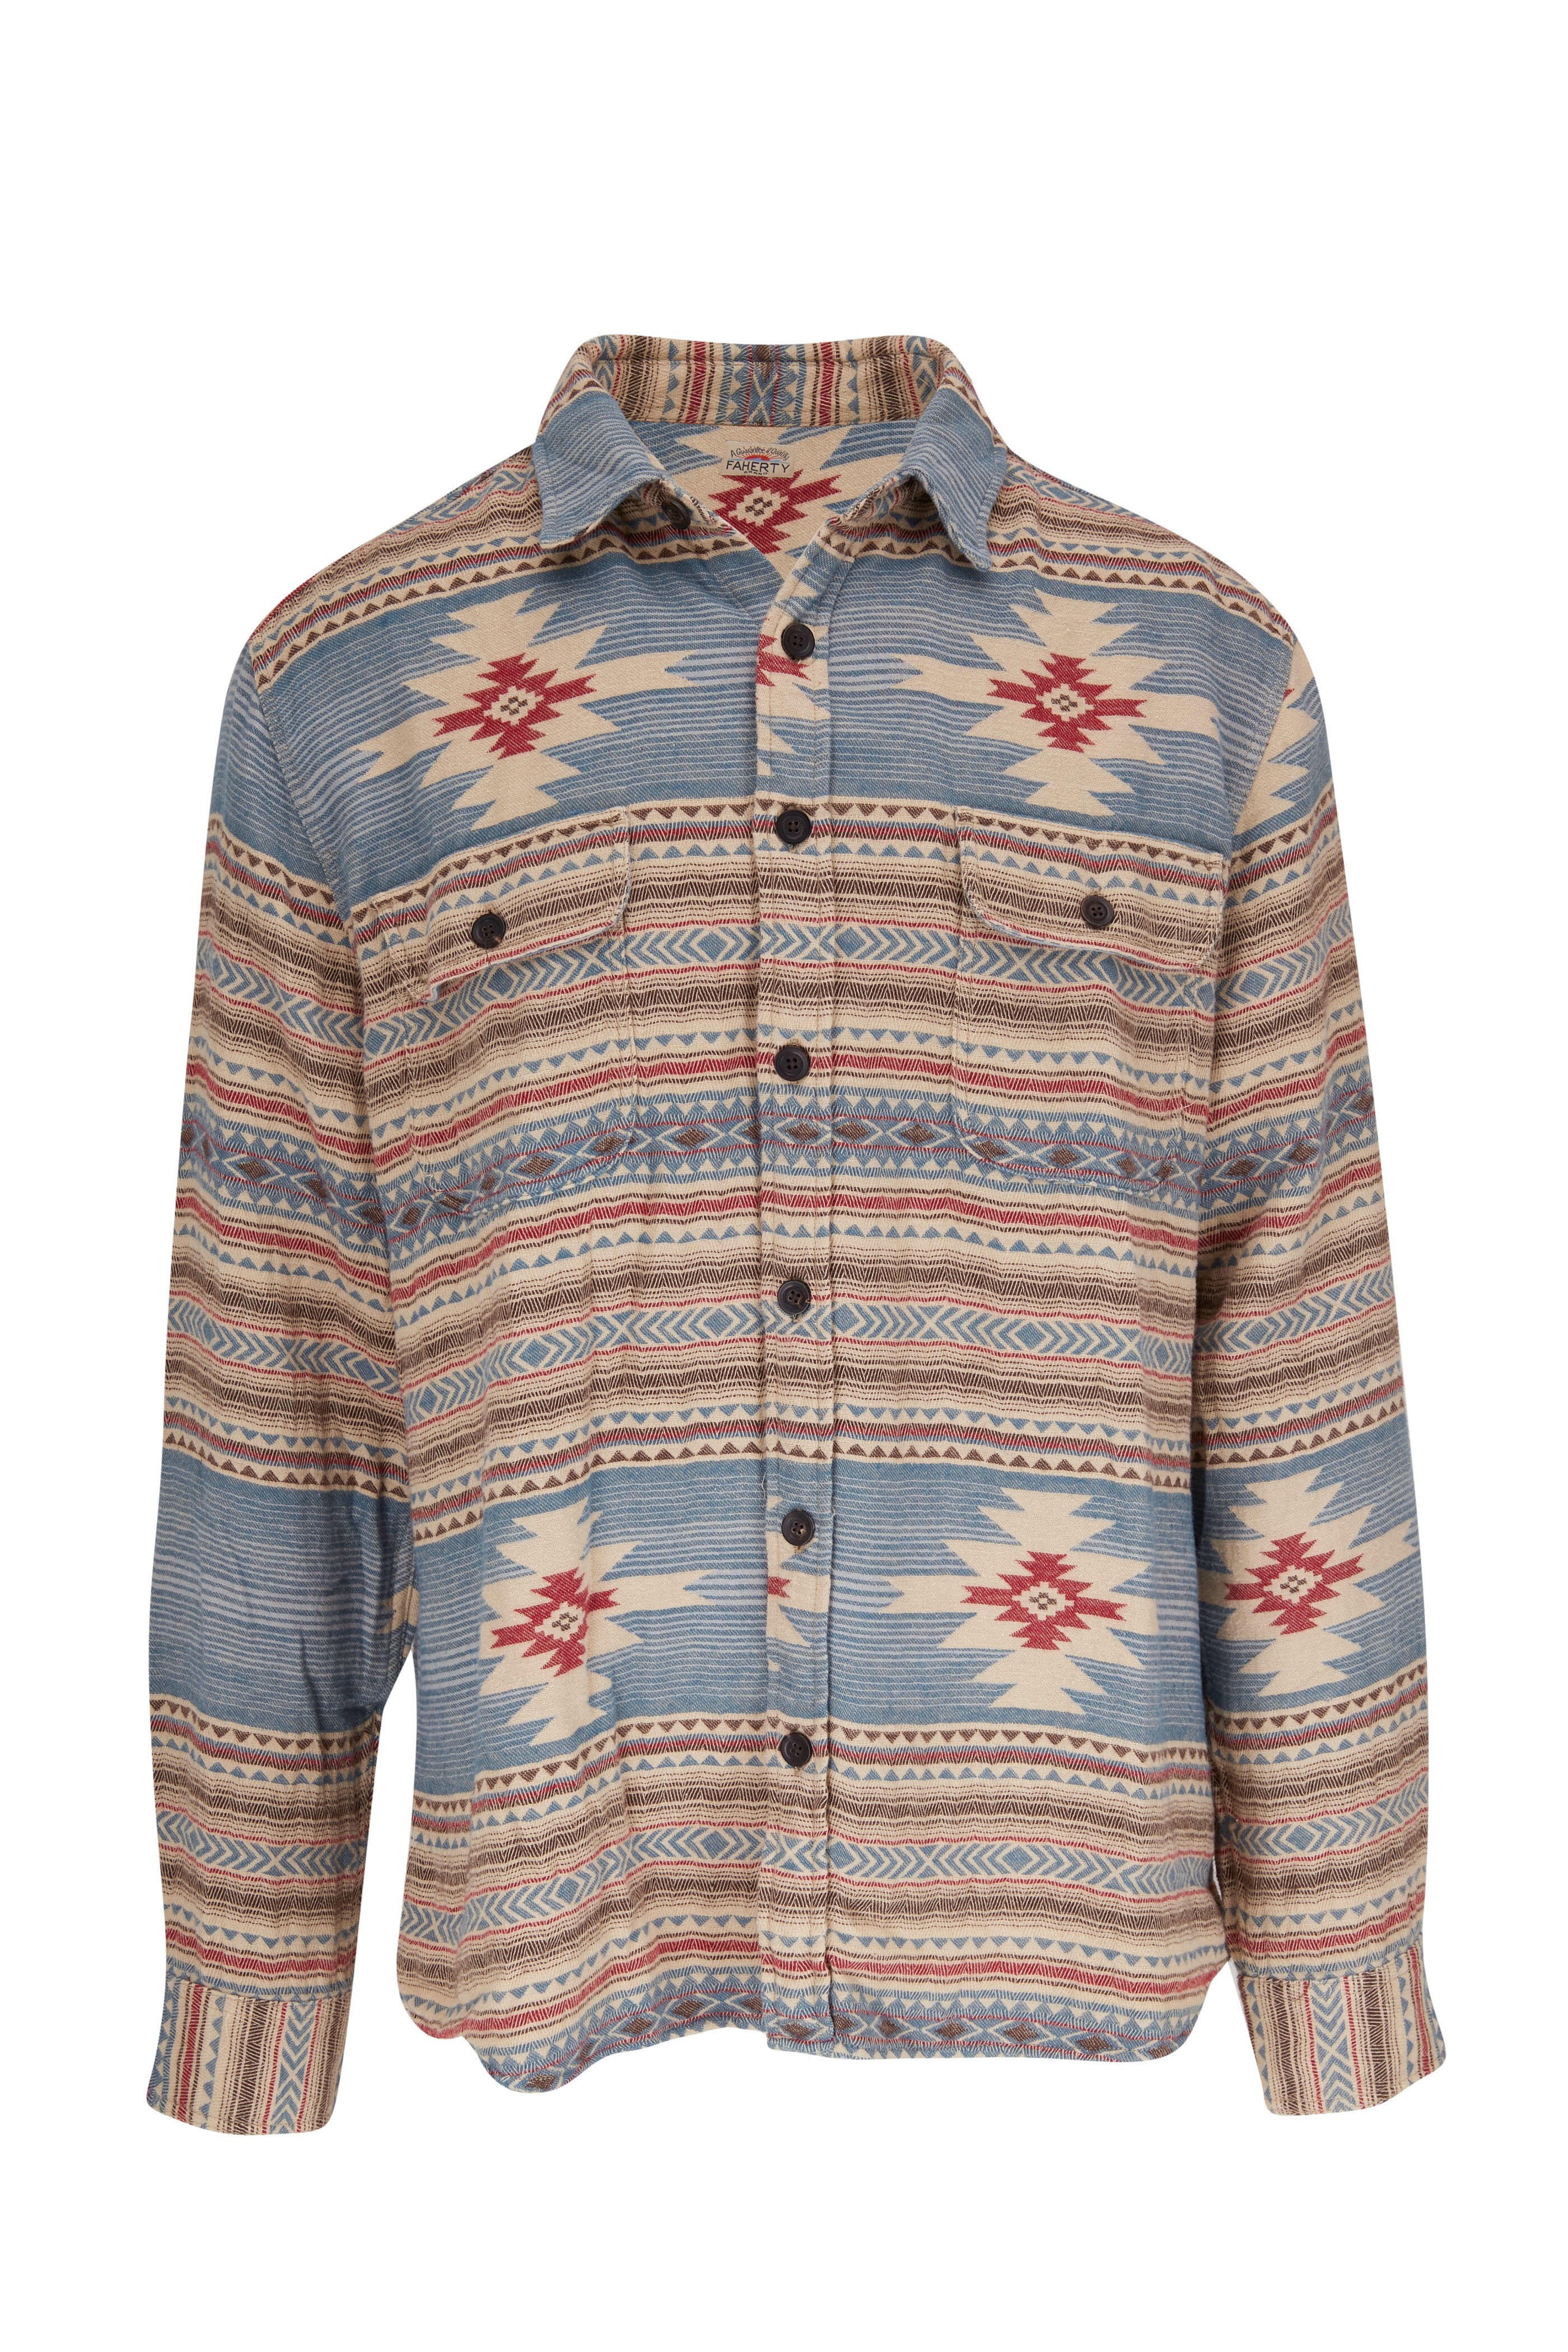 Faherty Brand - Canyon Nescove Overshirt | Mitchell Stores